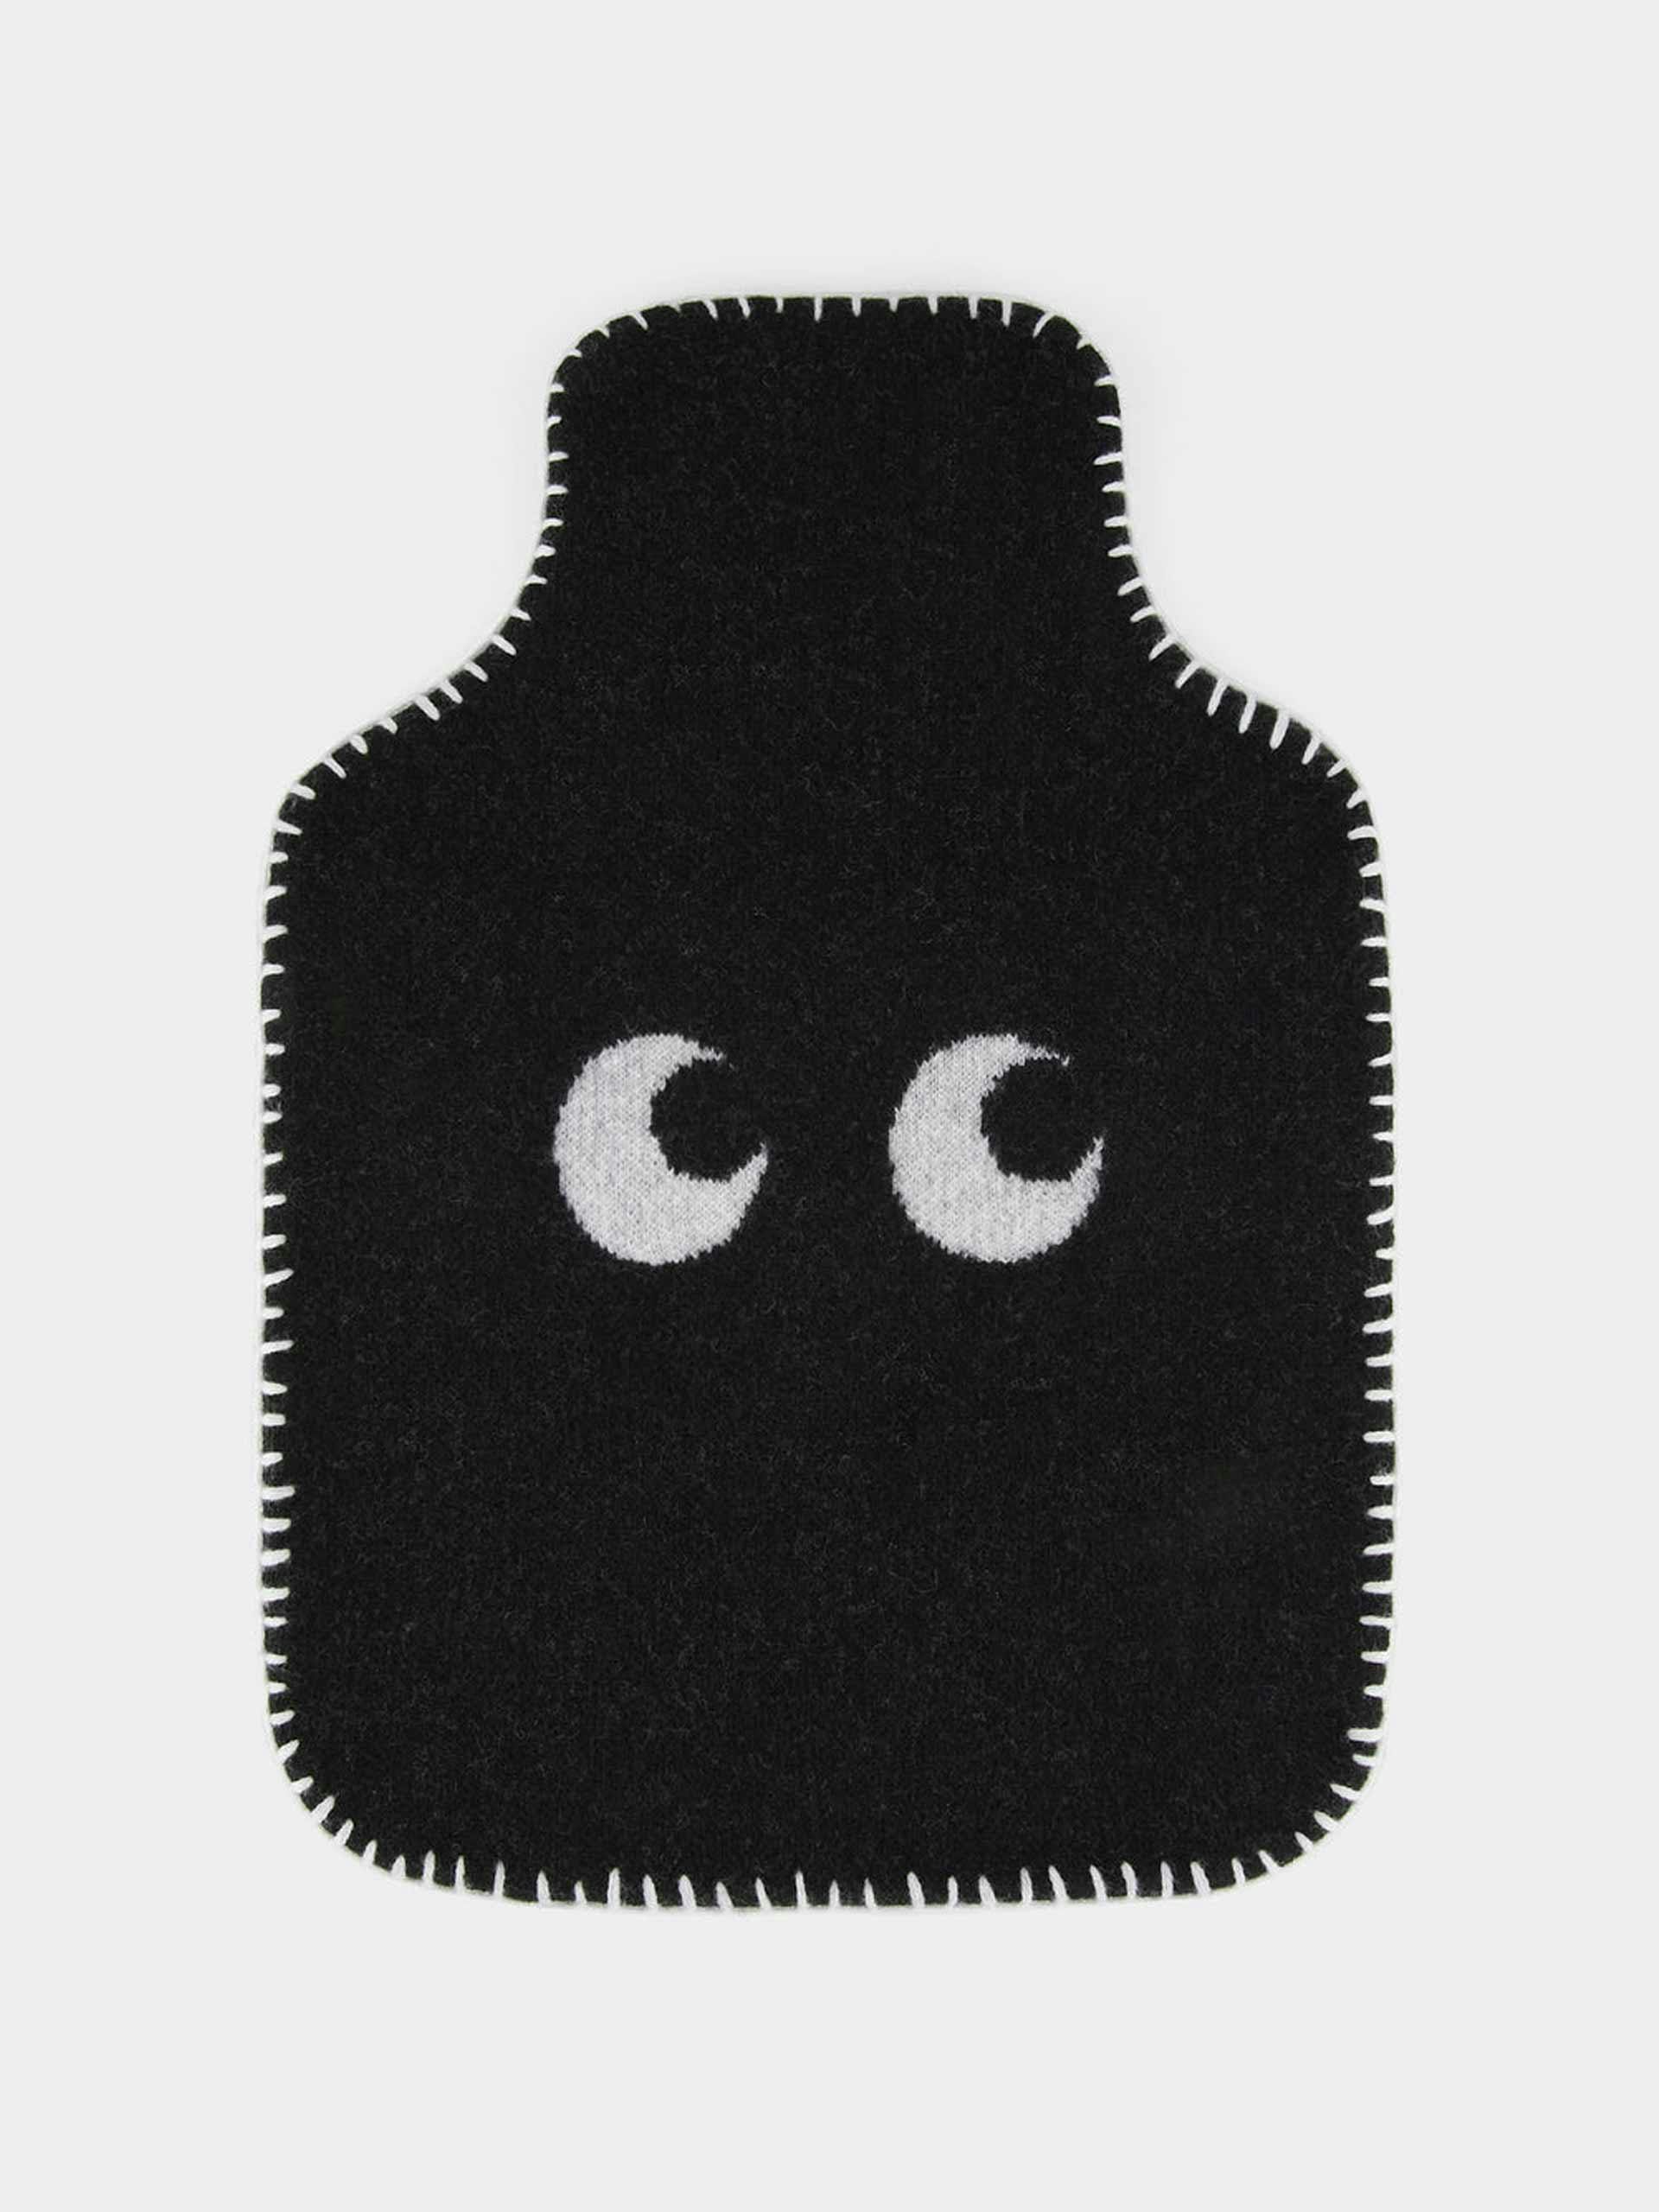 Eyes hot water bottle cover